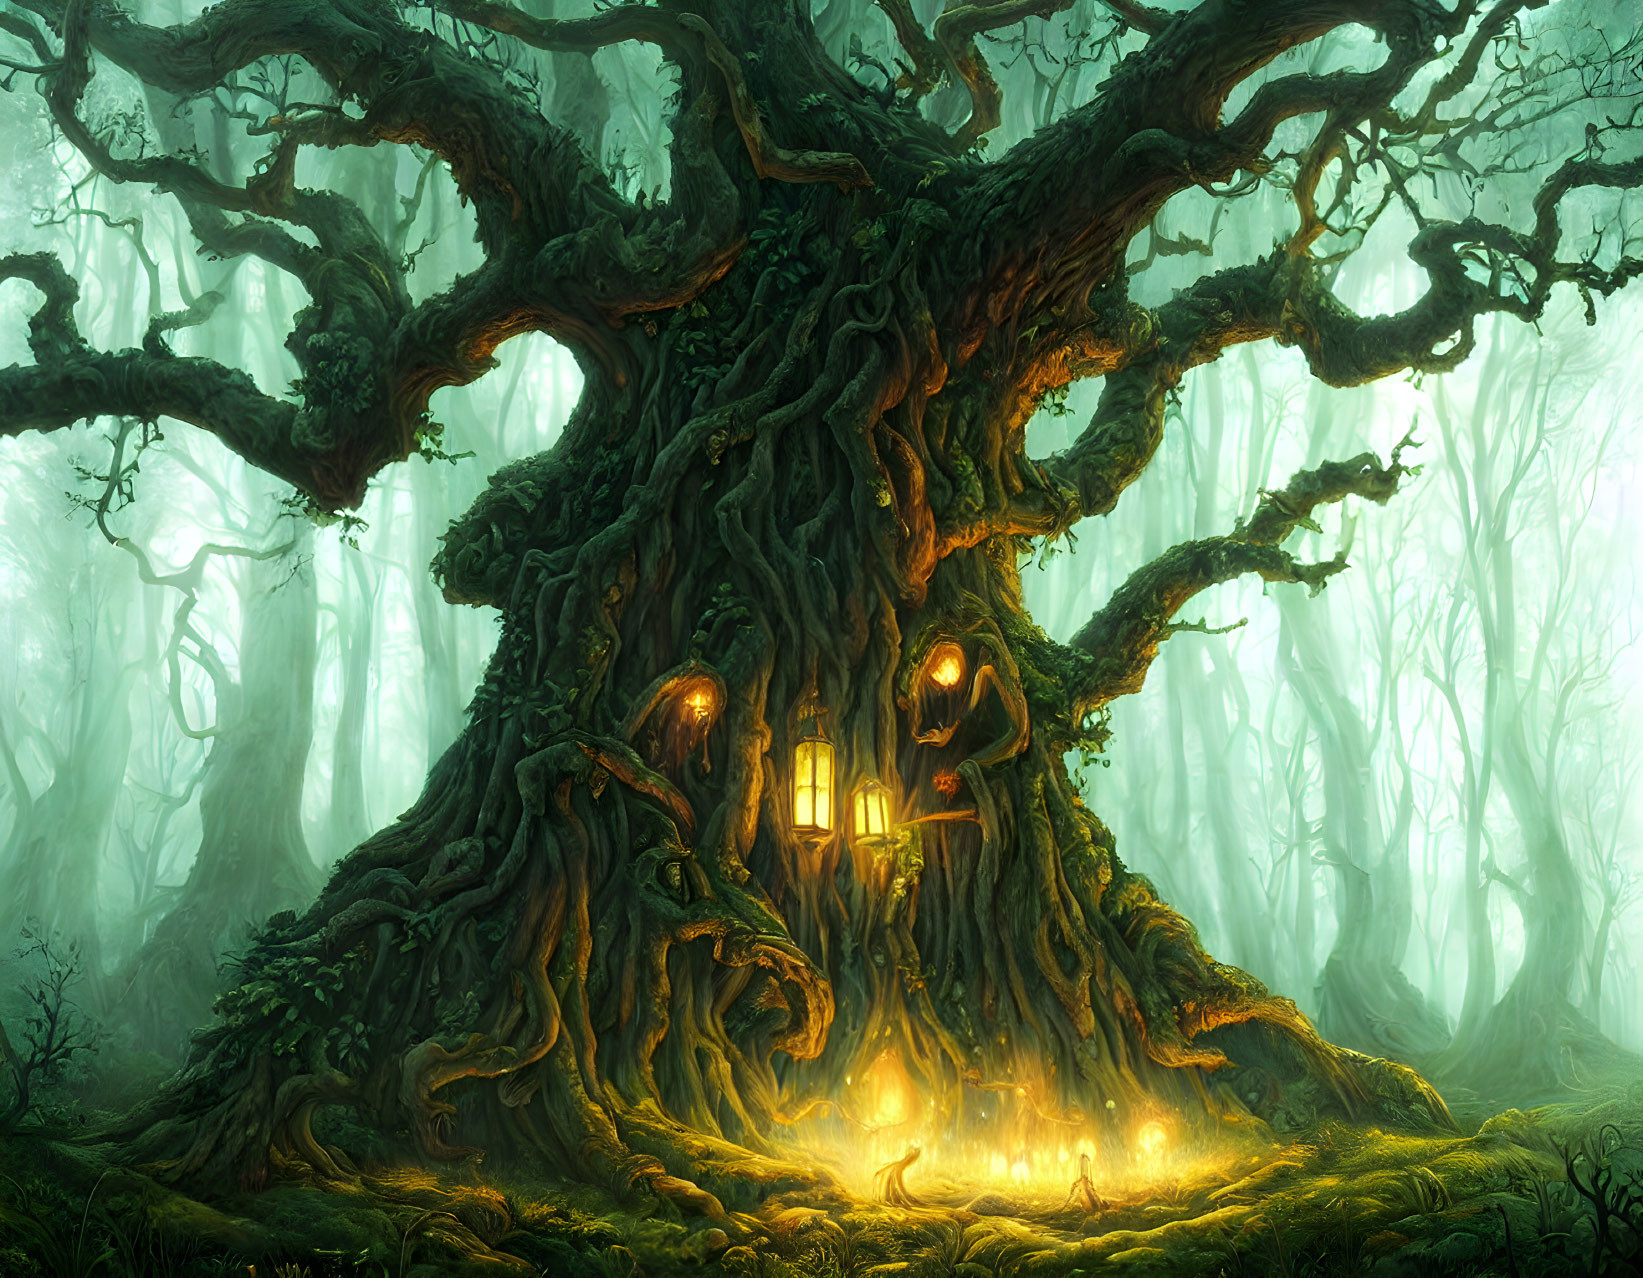 Enchanting forest scene with massive ancient tree and glowing windows and door